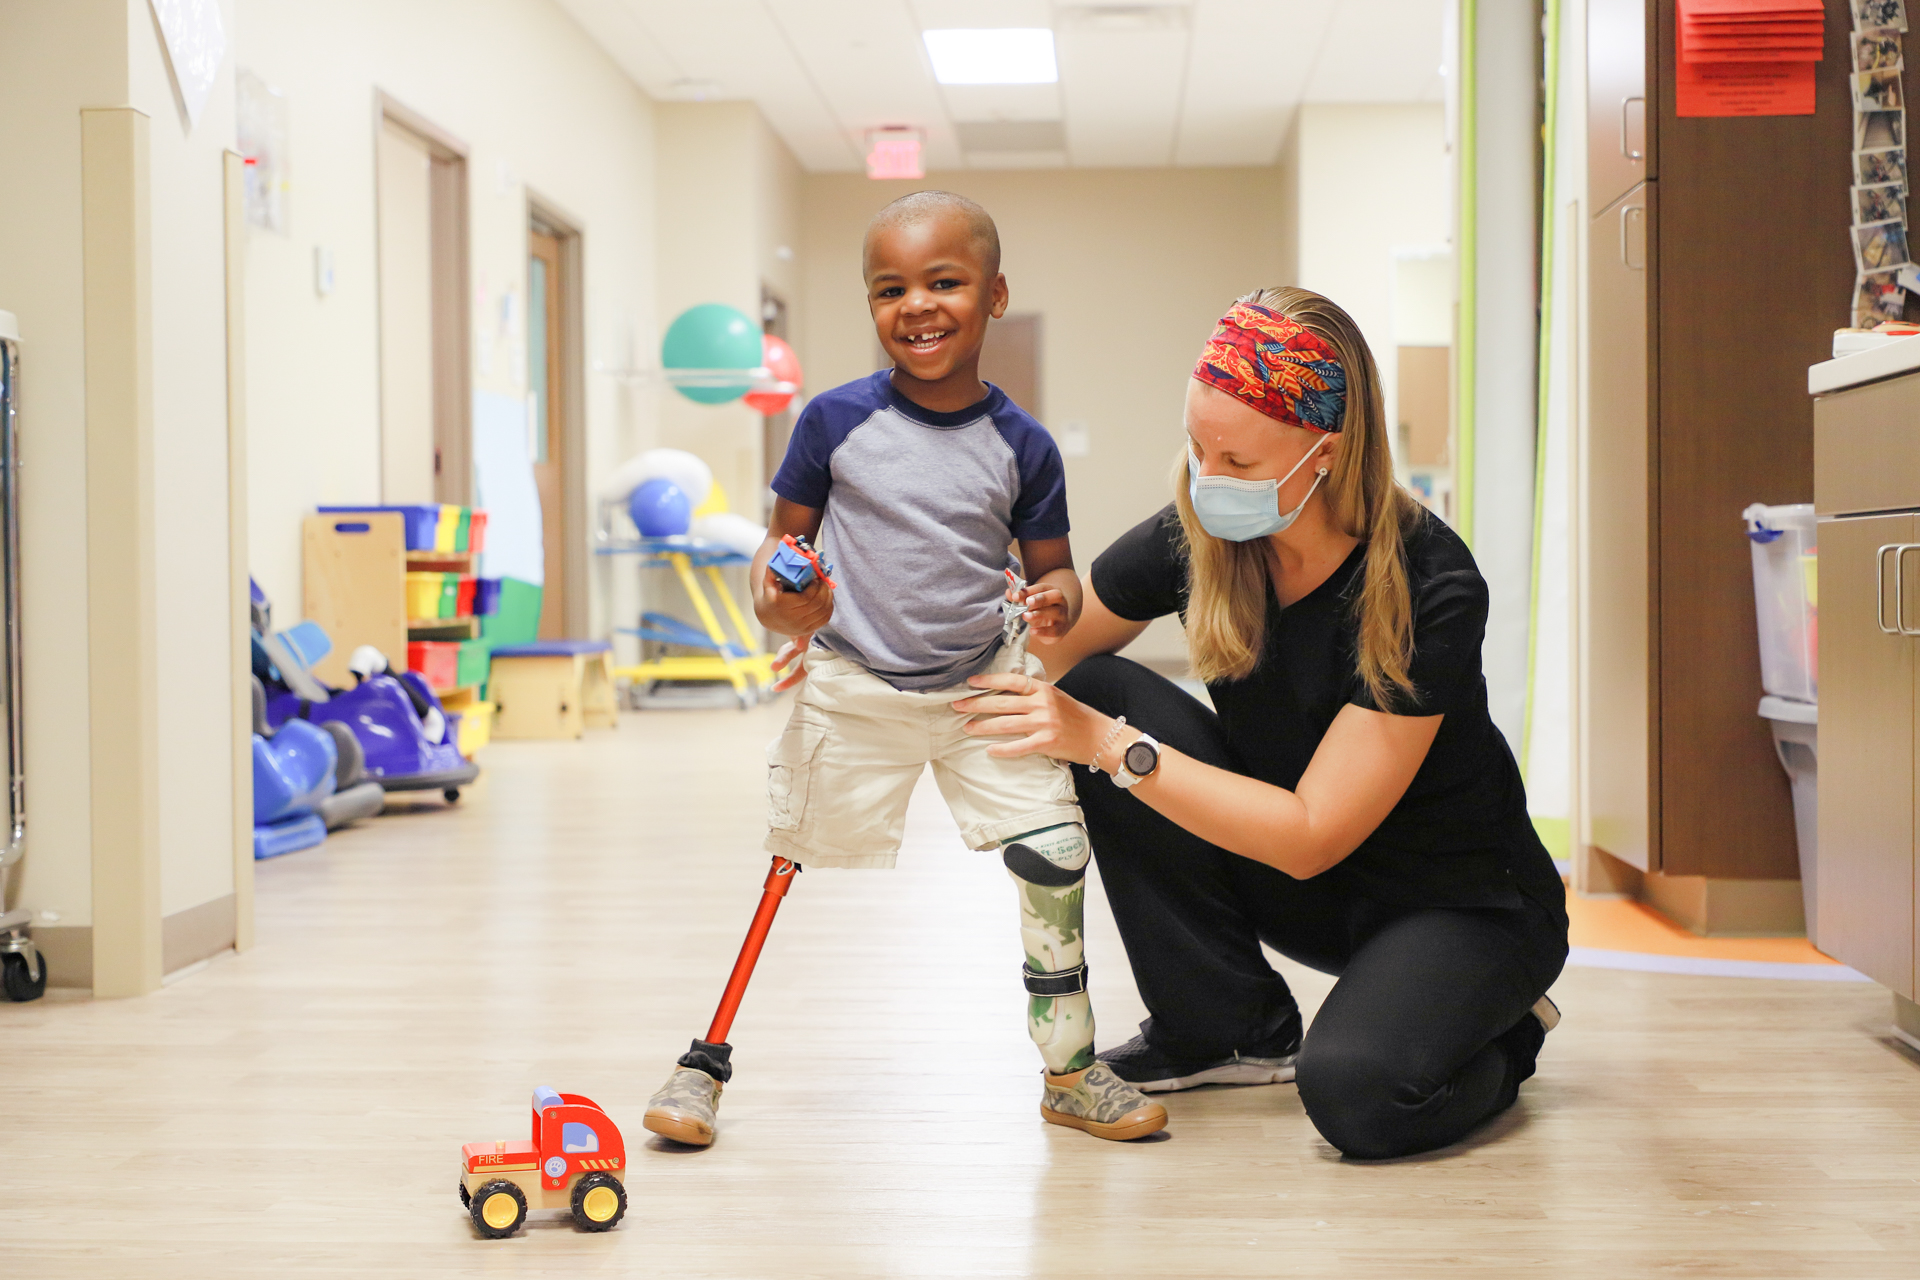 Pediatric patient takes miracle first steps